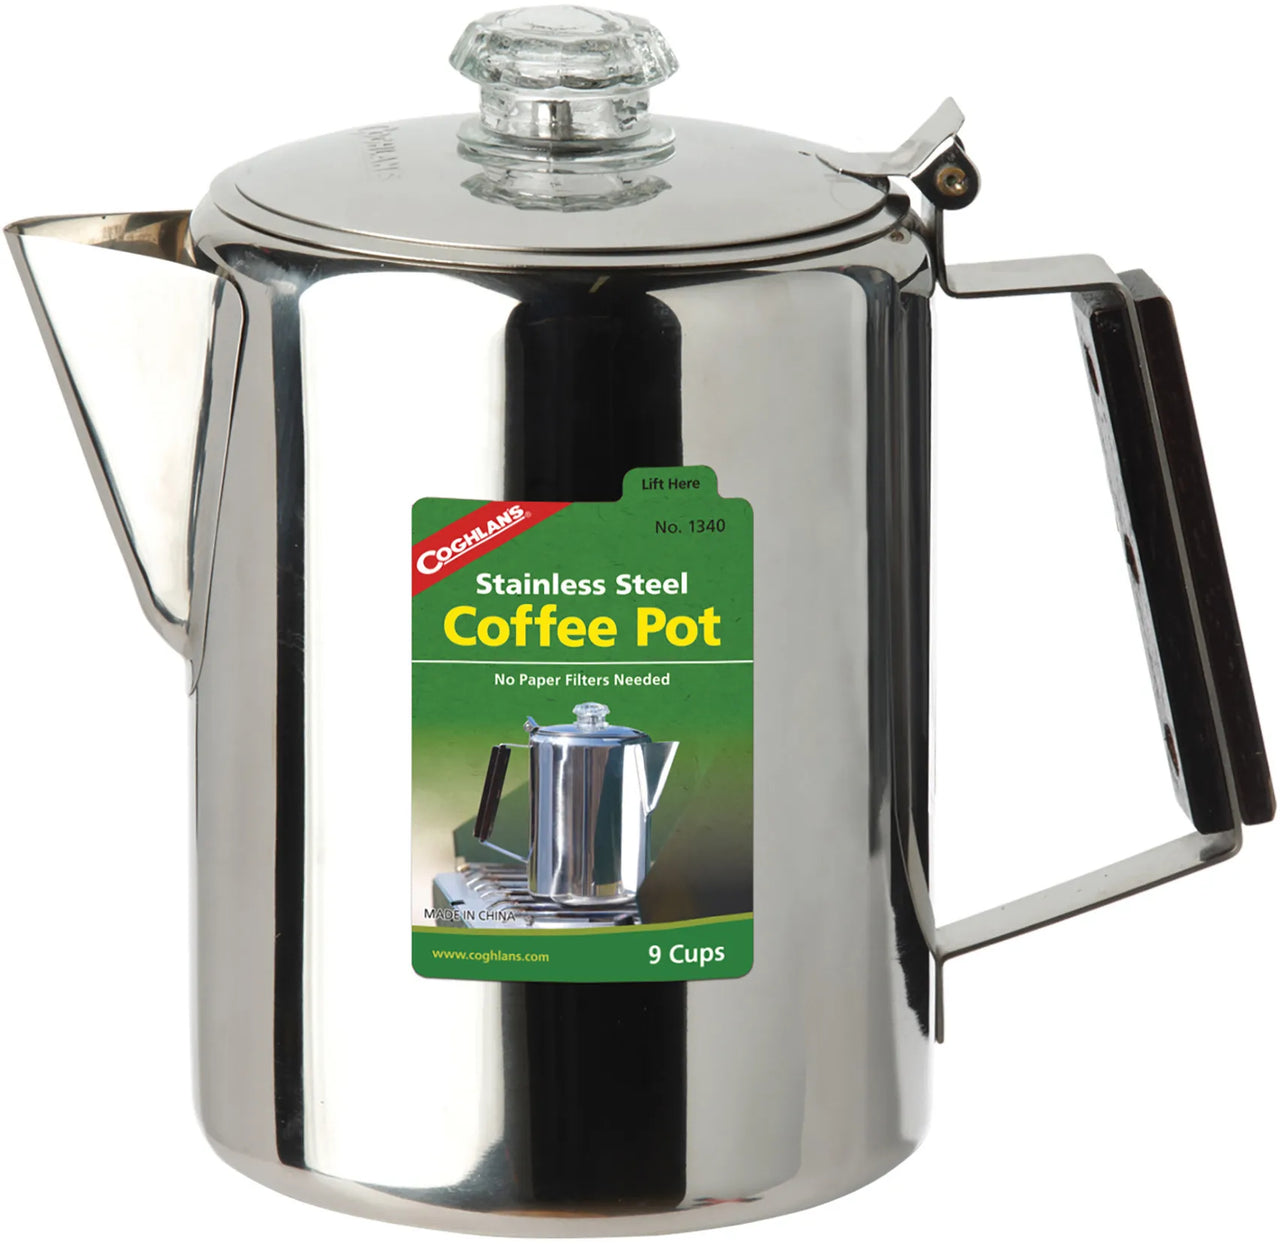 Stainless Steel Percolator - 9 Cups